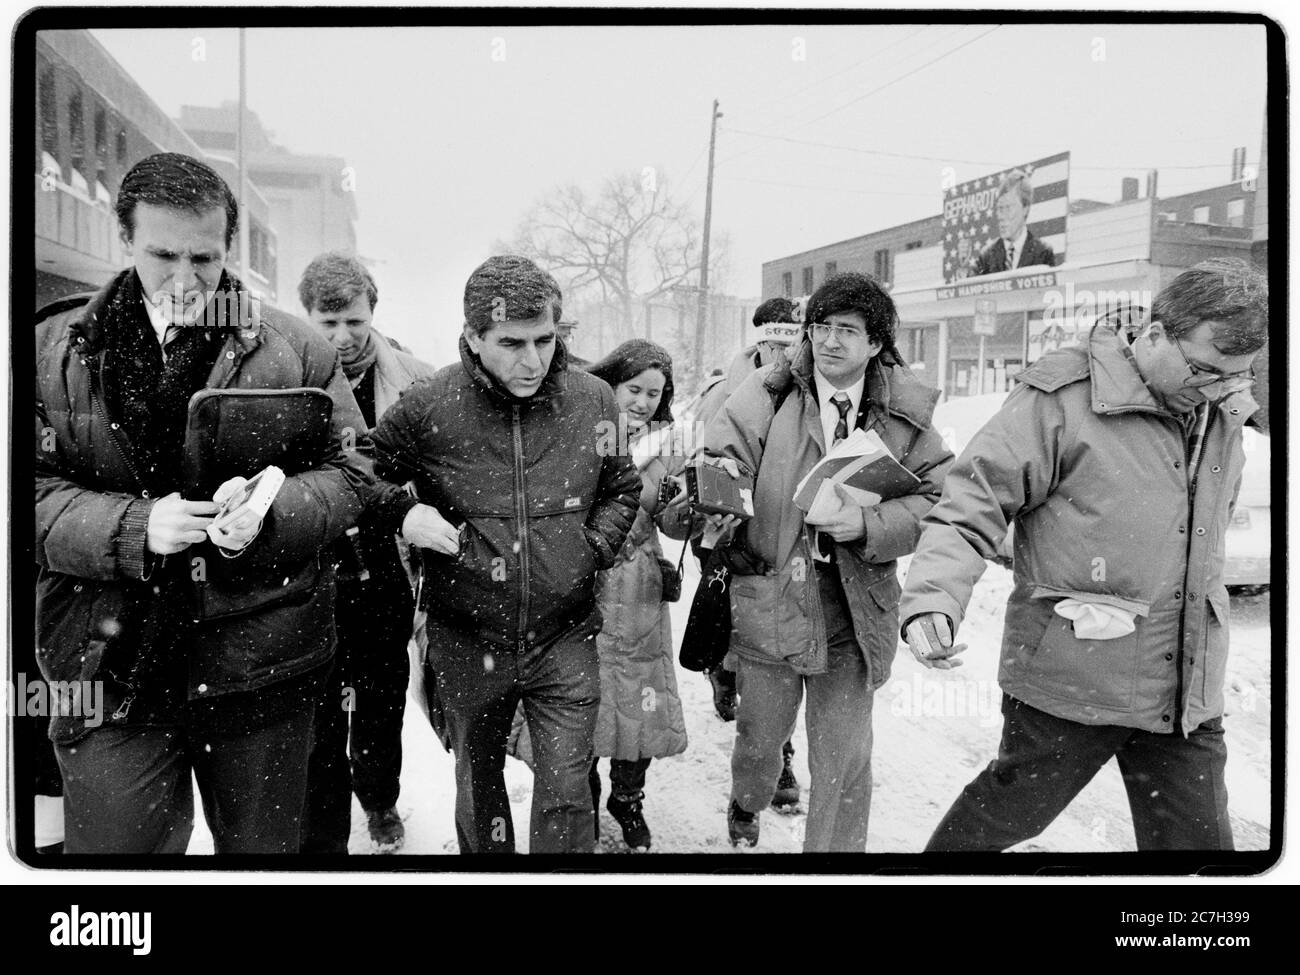 US Presidential Election Campaign 1988 Michael Dukakis, Democratic Candidate who served as the 65th governor of Massachusetts on the campaign trail during the New Hampshire Primaries in February 1988 Stock Photo